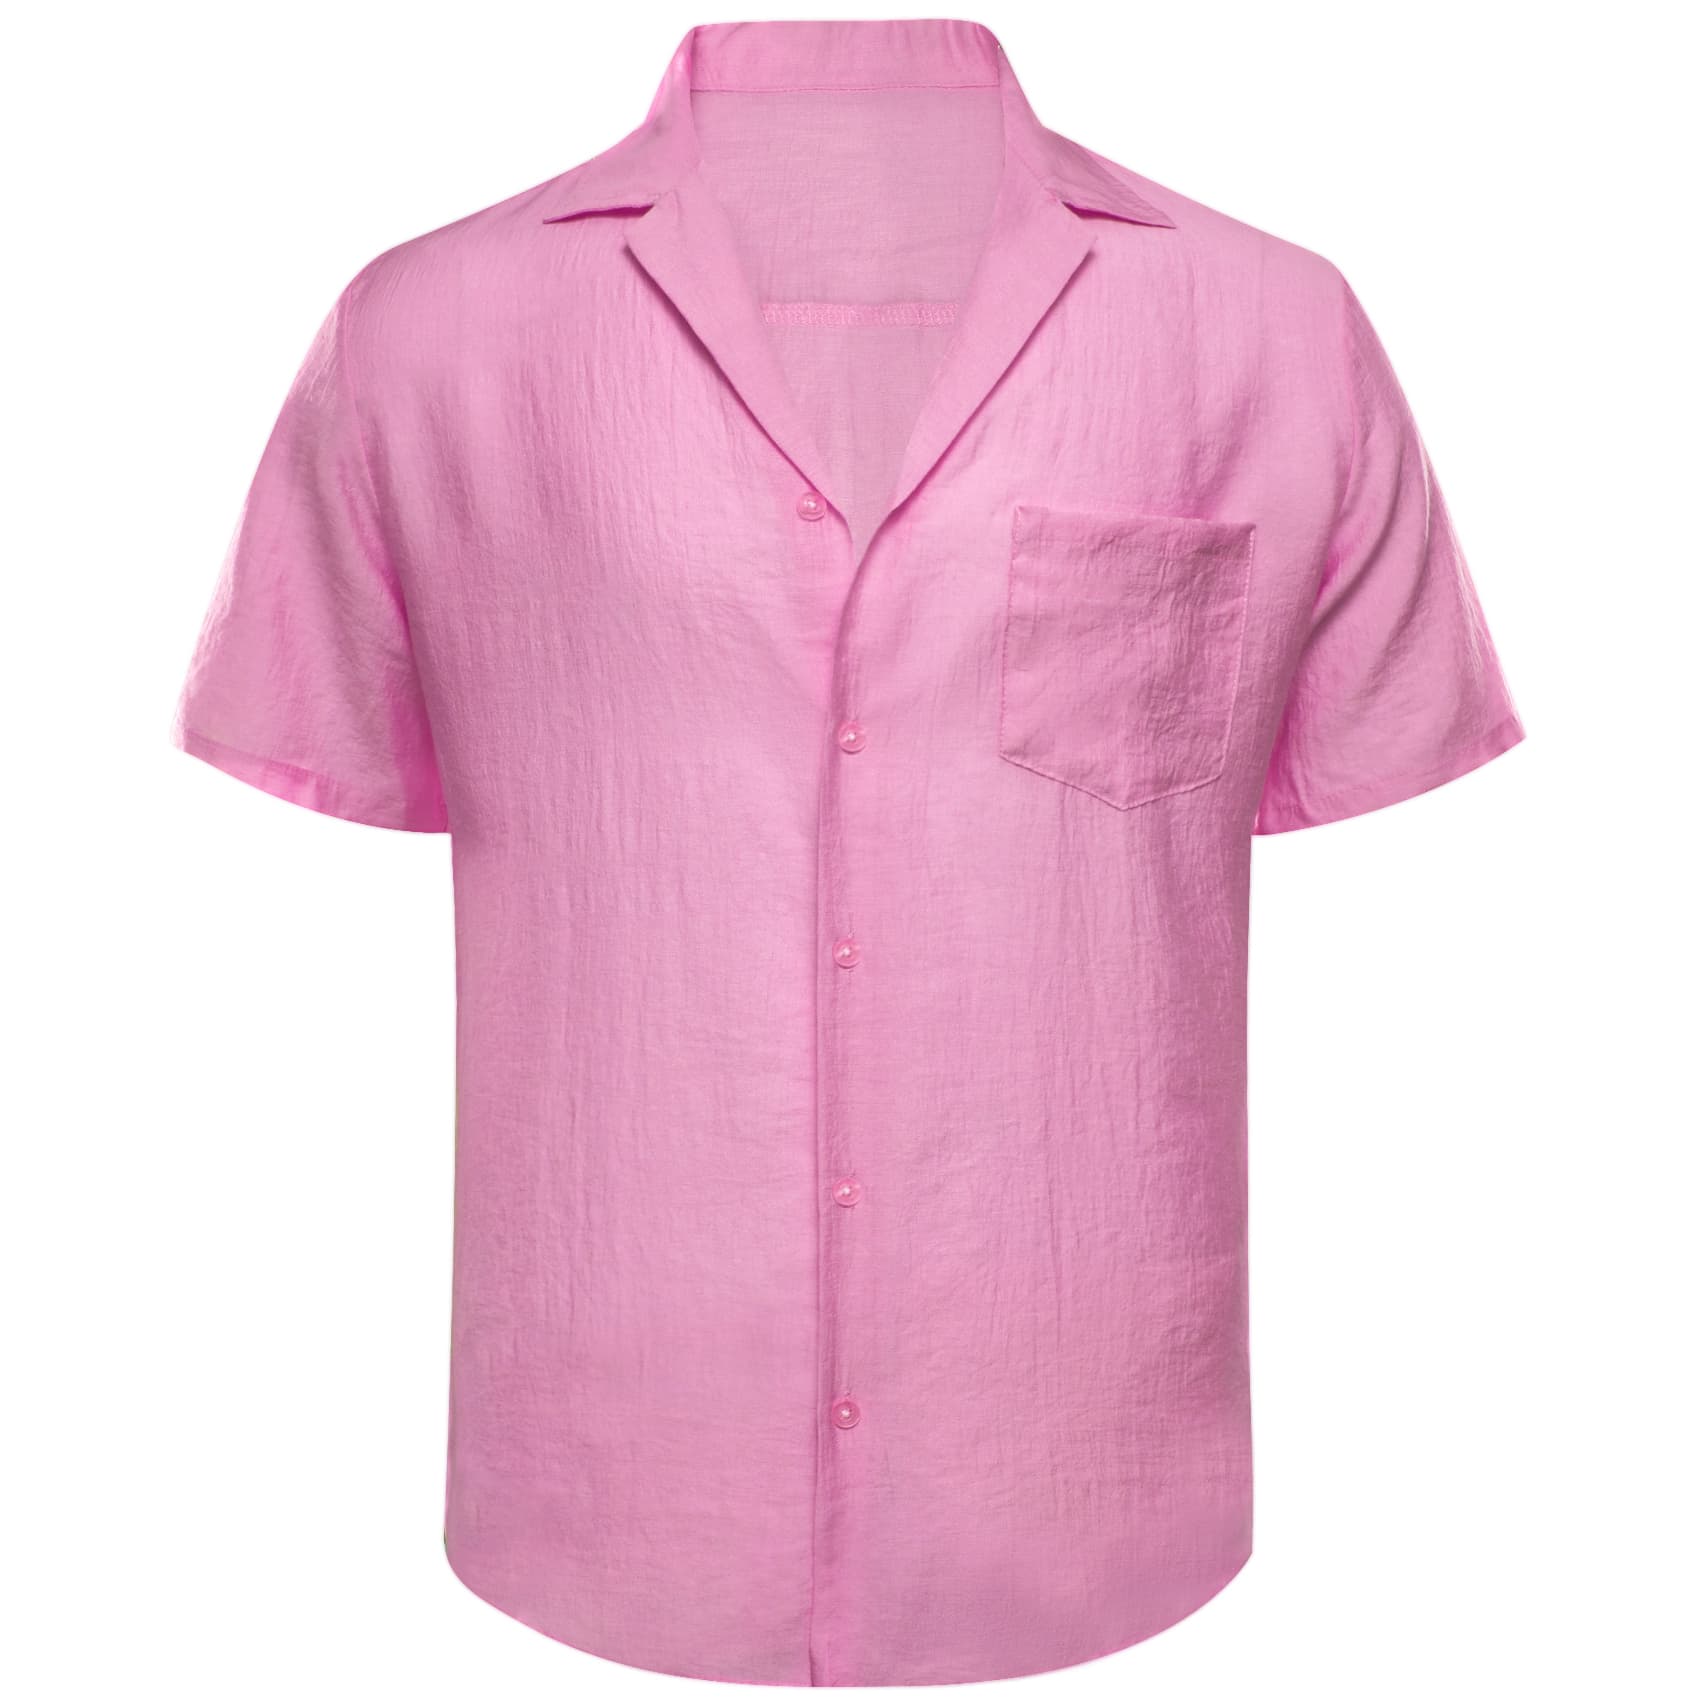 pINK SOLID business casual men shirts